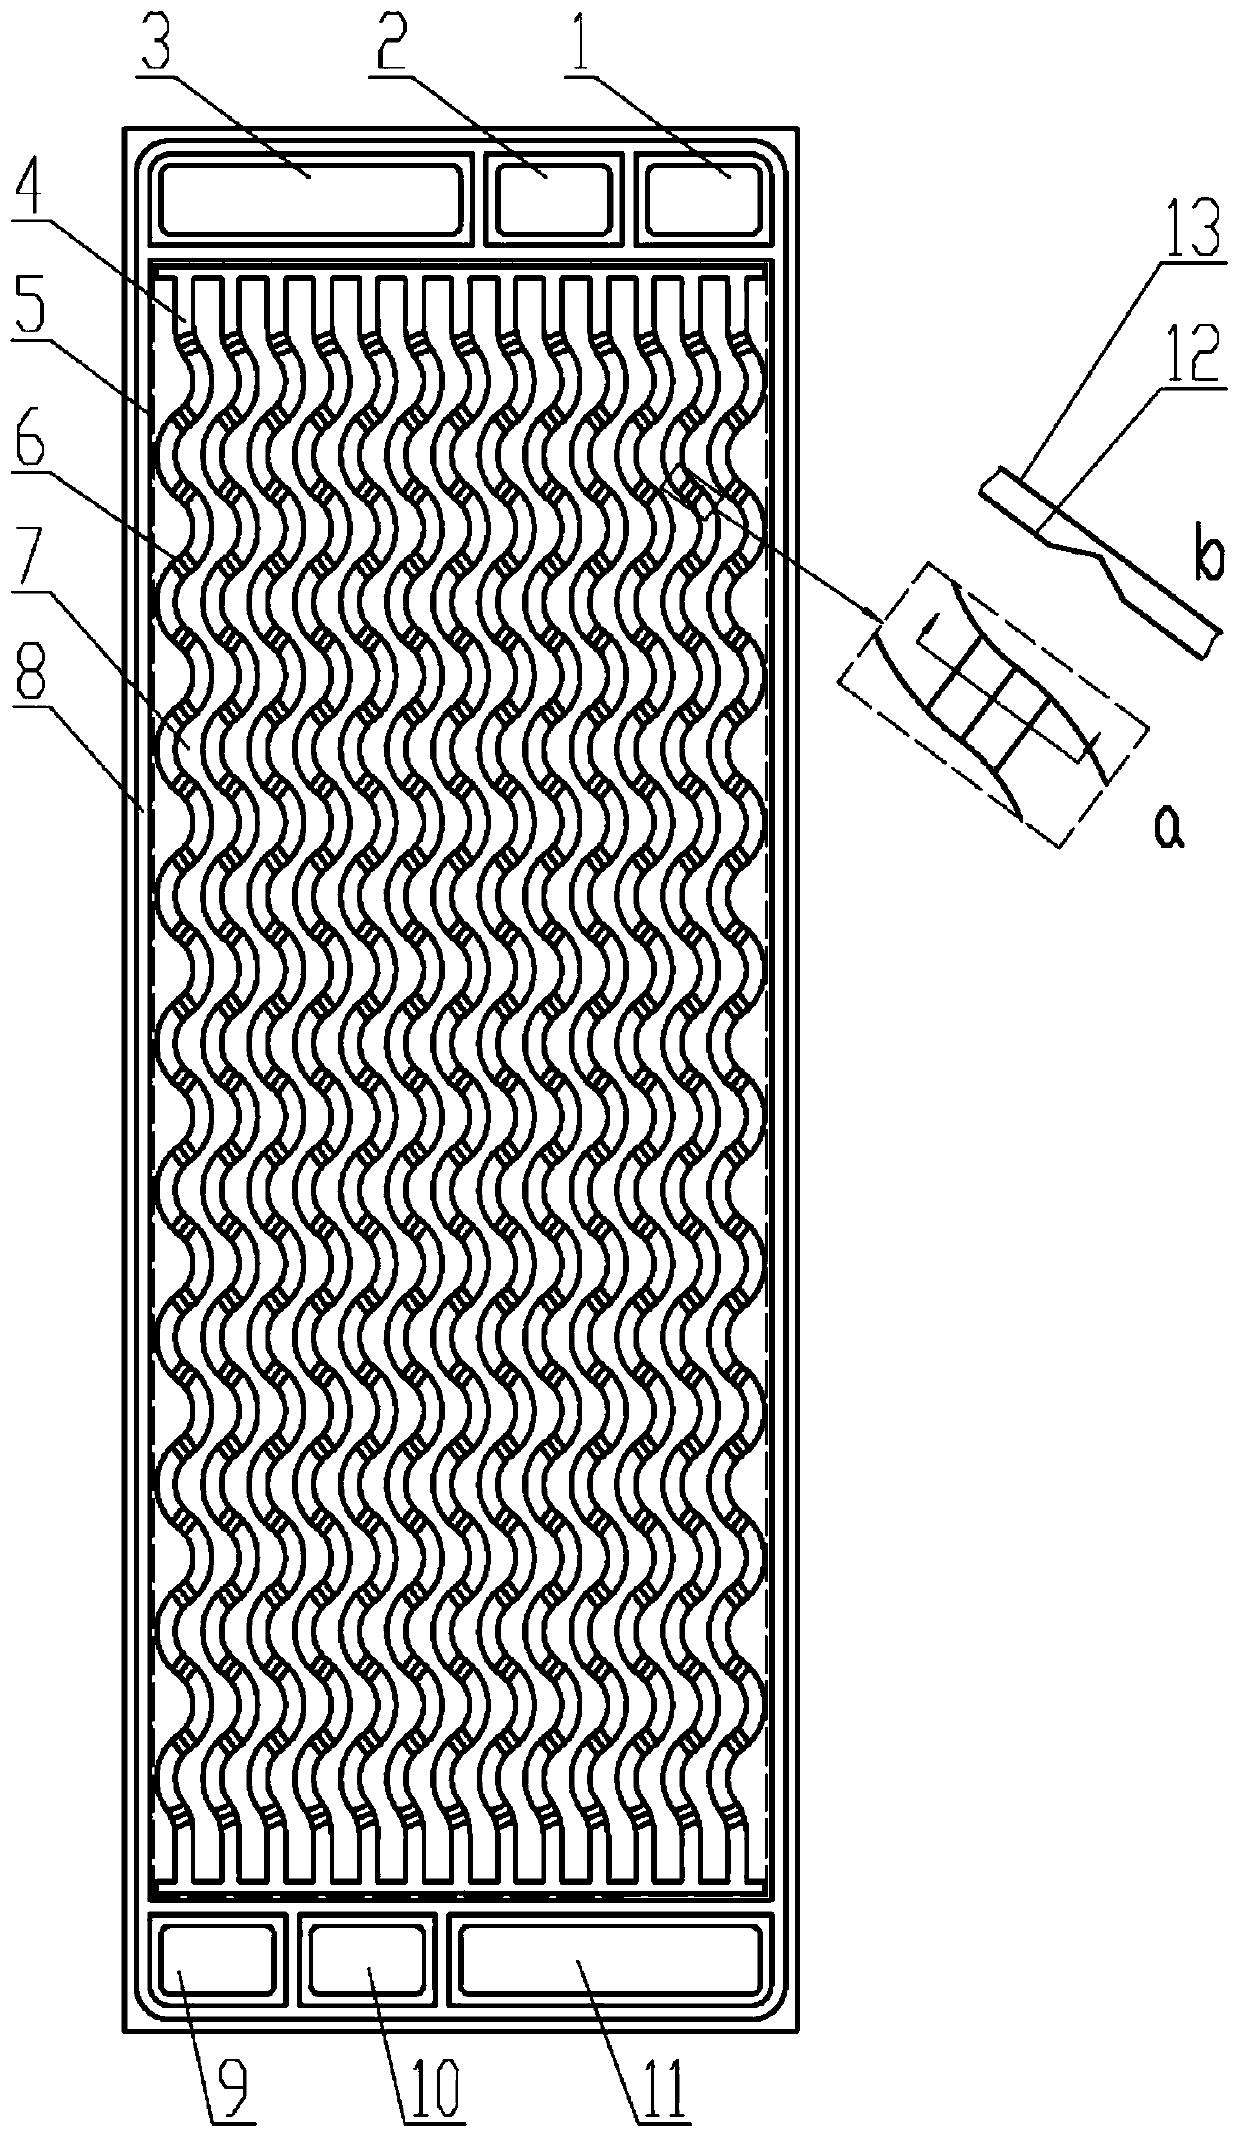 Metal bipolar plate flow field runner structure of fuel cell